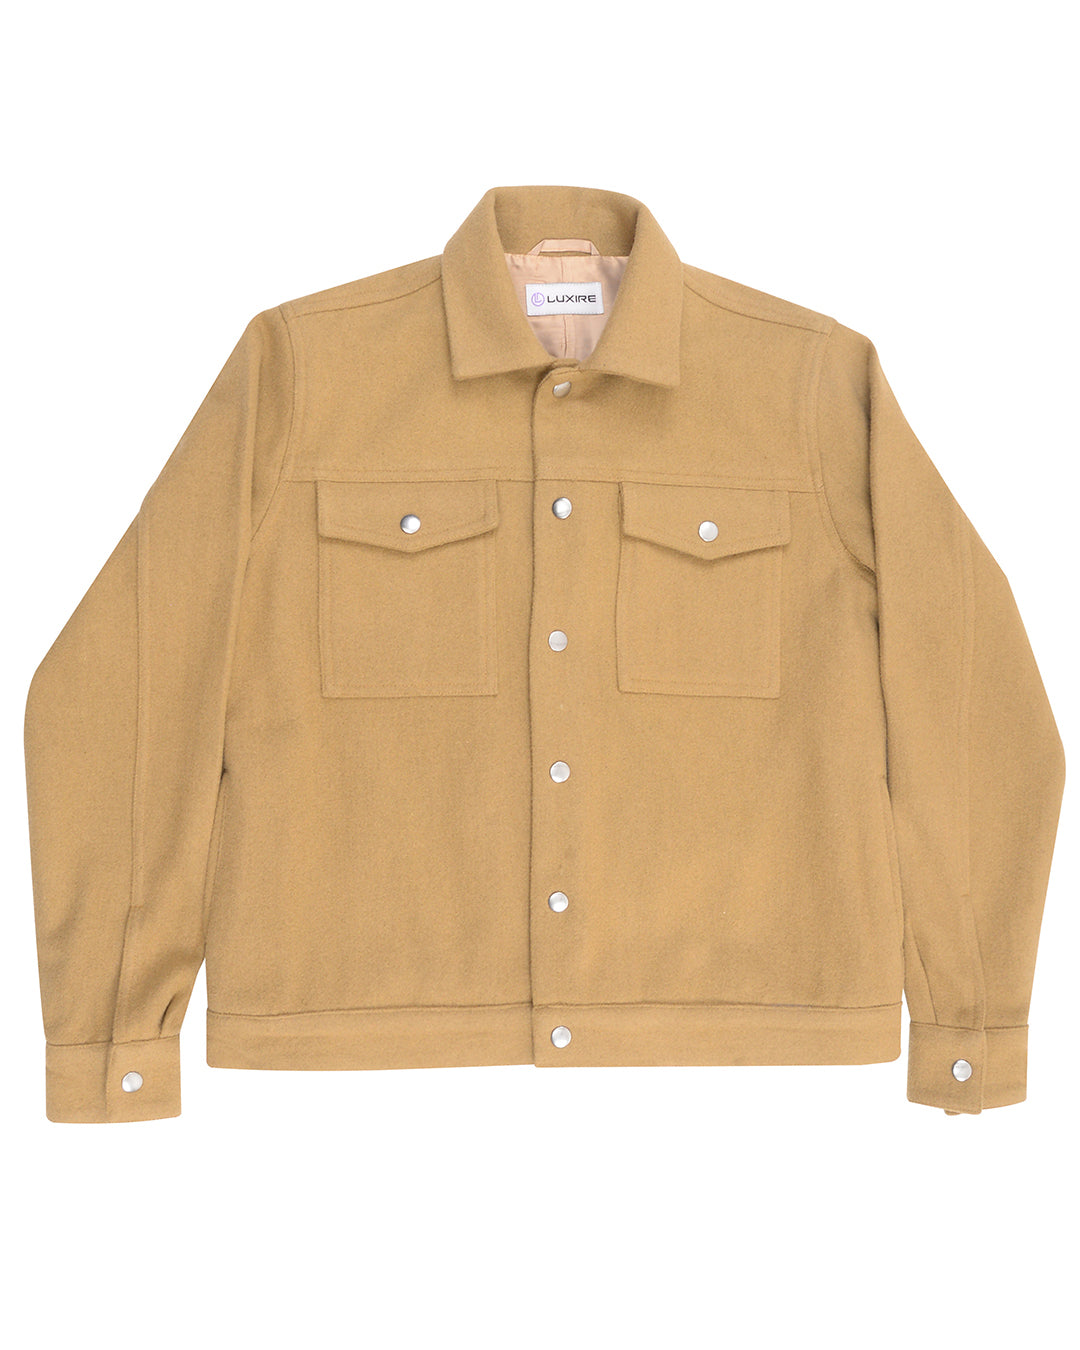 Luxire Recycled Wool Camel Shirt Jacket